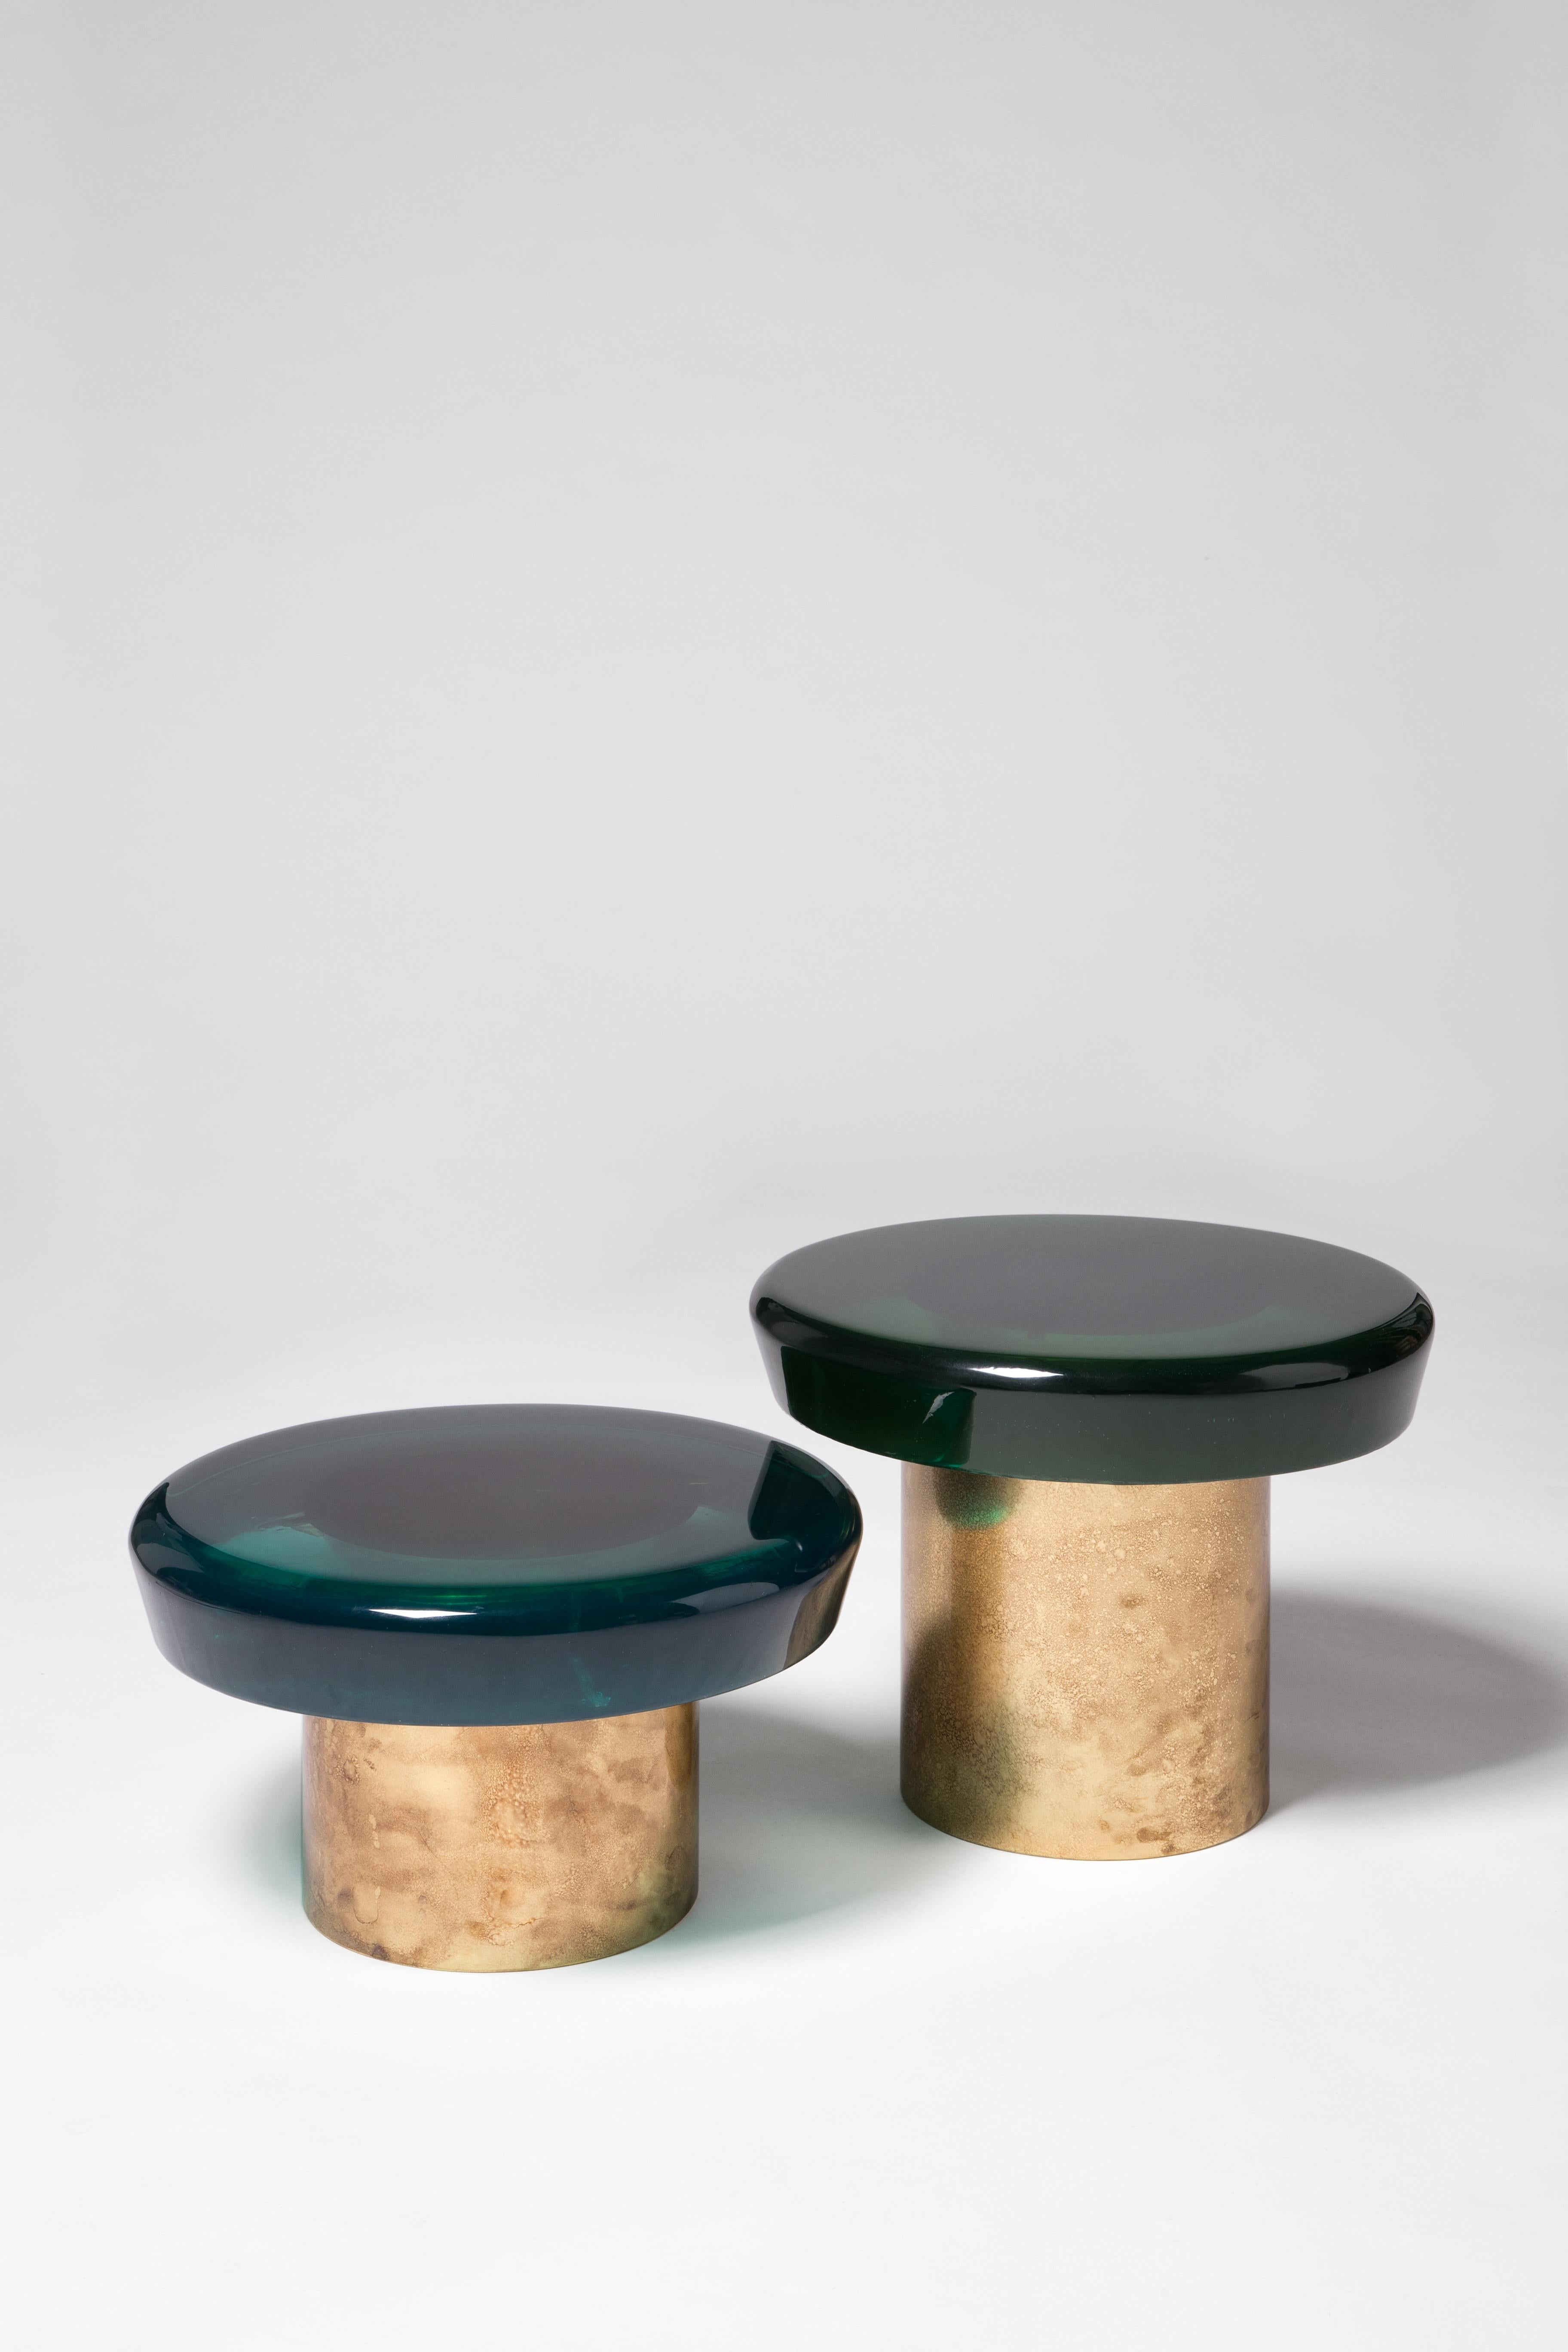 Set of 2 jade coffee table by Draga & Aurel
Dimensions: W 50, D 50, H 28, top Ø 50 cm
W 50, D 50, H 38, top Ø 50 cm
Materials: Resin and bronze

Formed from a combination of reflective resin and solid brass, the Jade coffee tables look like